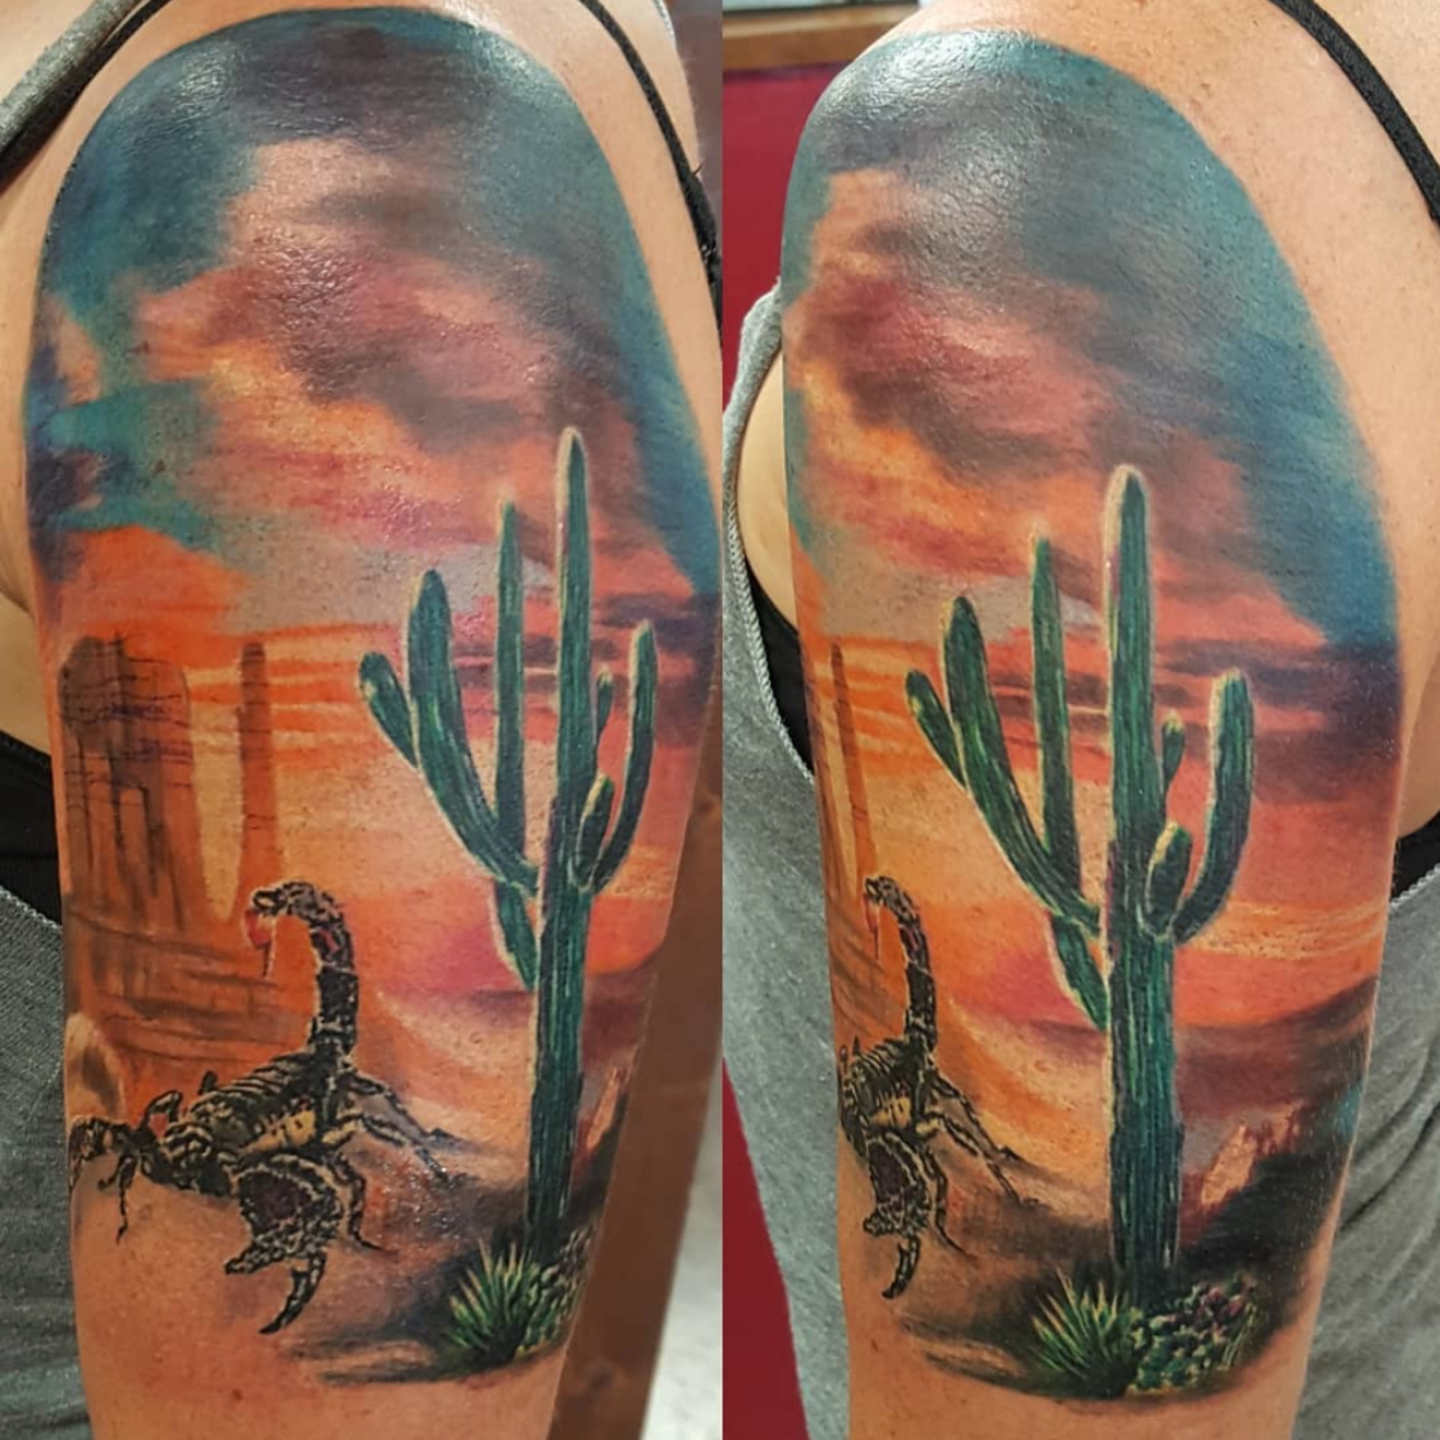 Tucson tattoo culture an oasis for art expression in Southwest   Recreation And Entertainment  pinalcentralcom